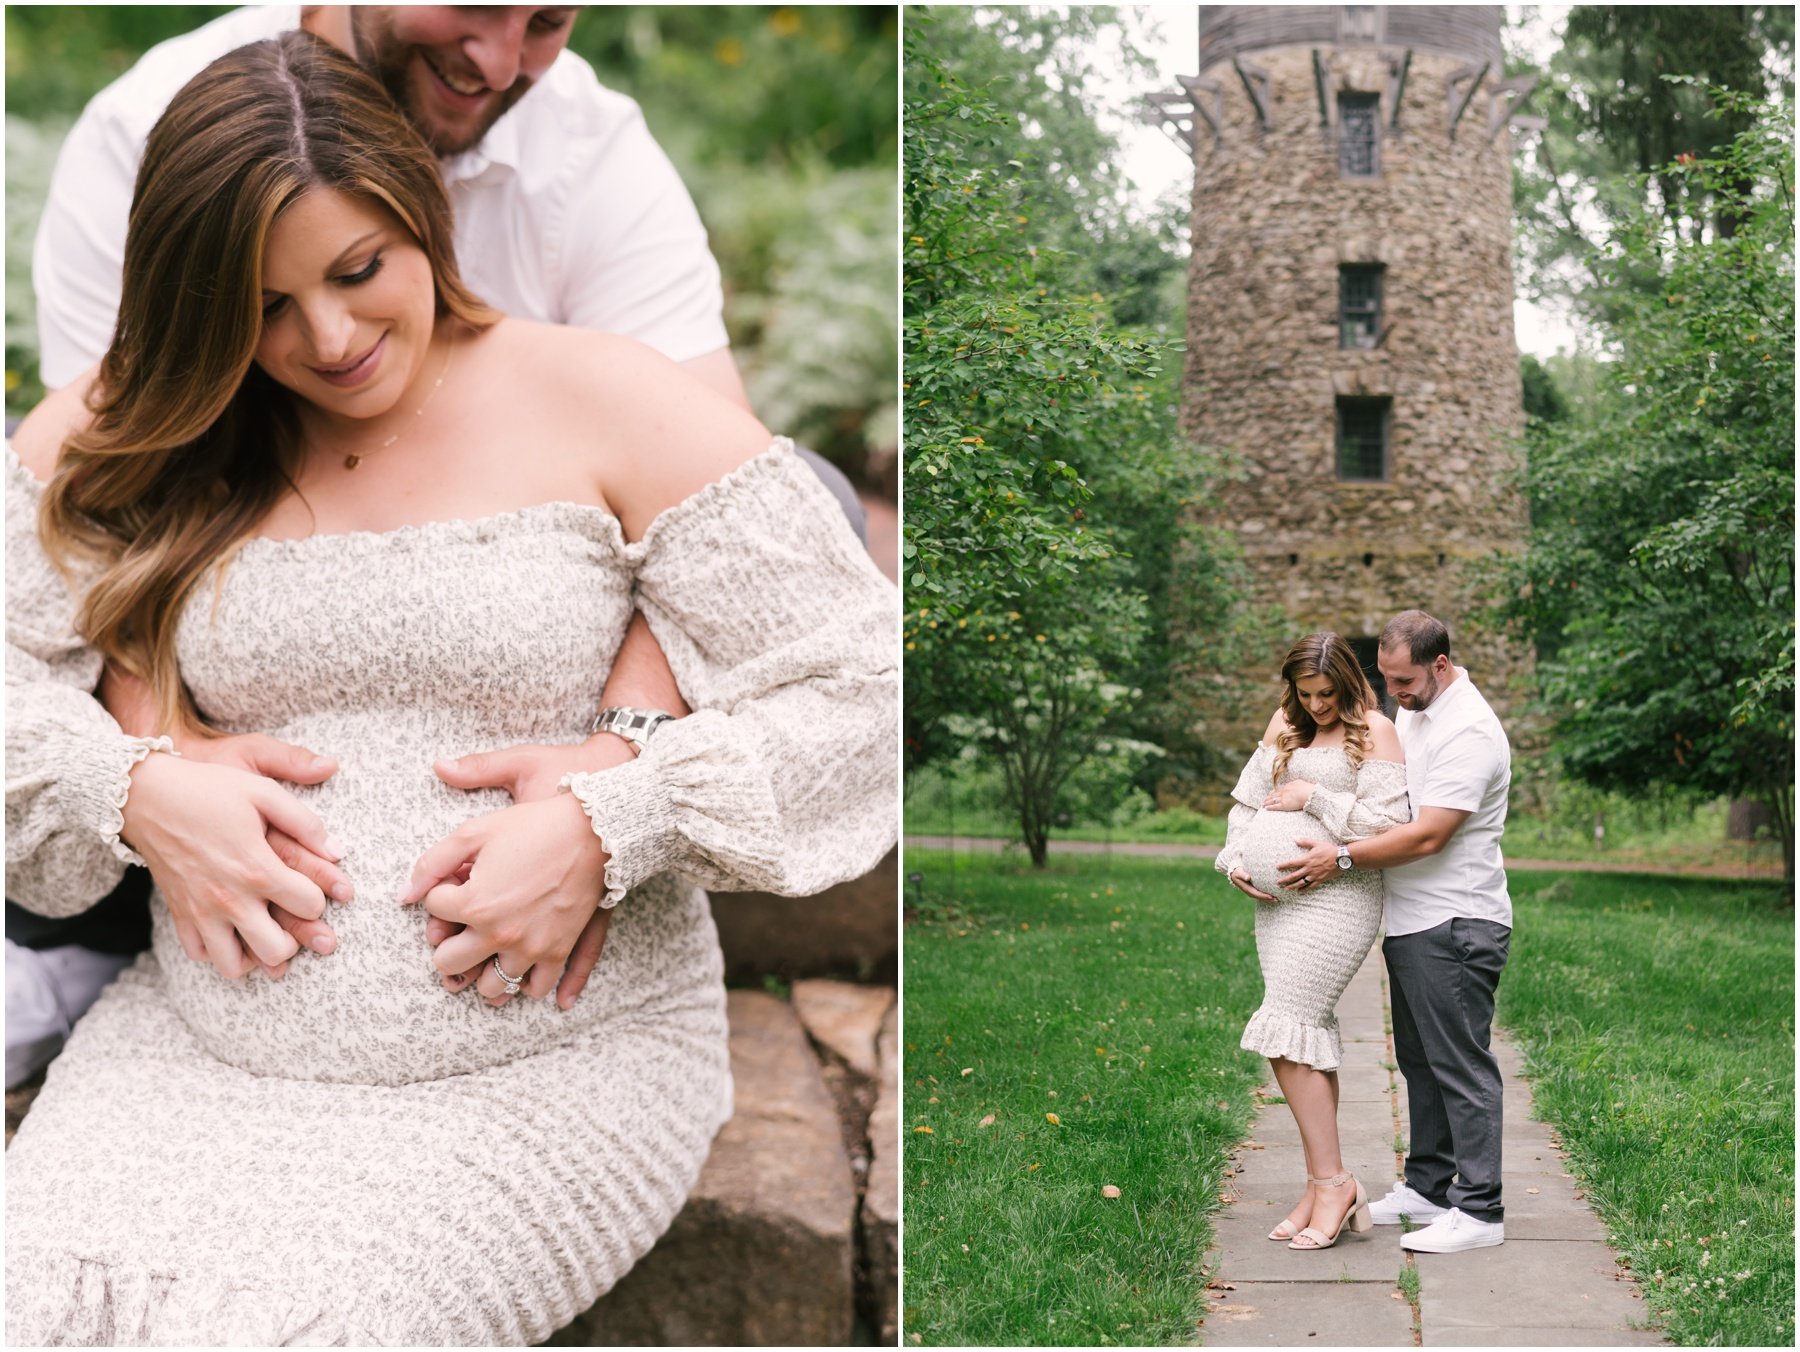 Couple placing hands on belly during maternity session | NKB Photo